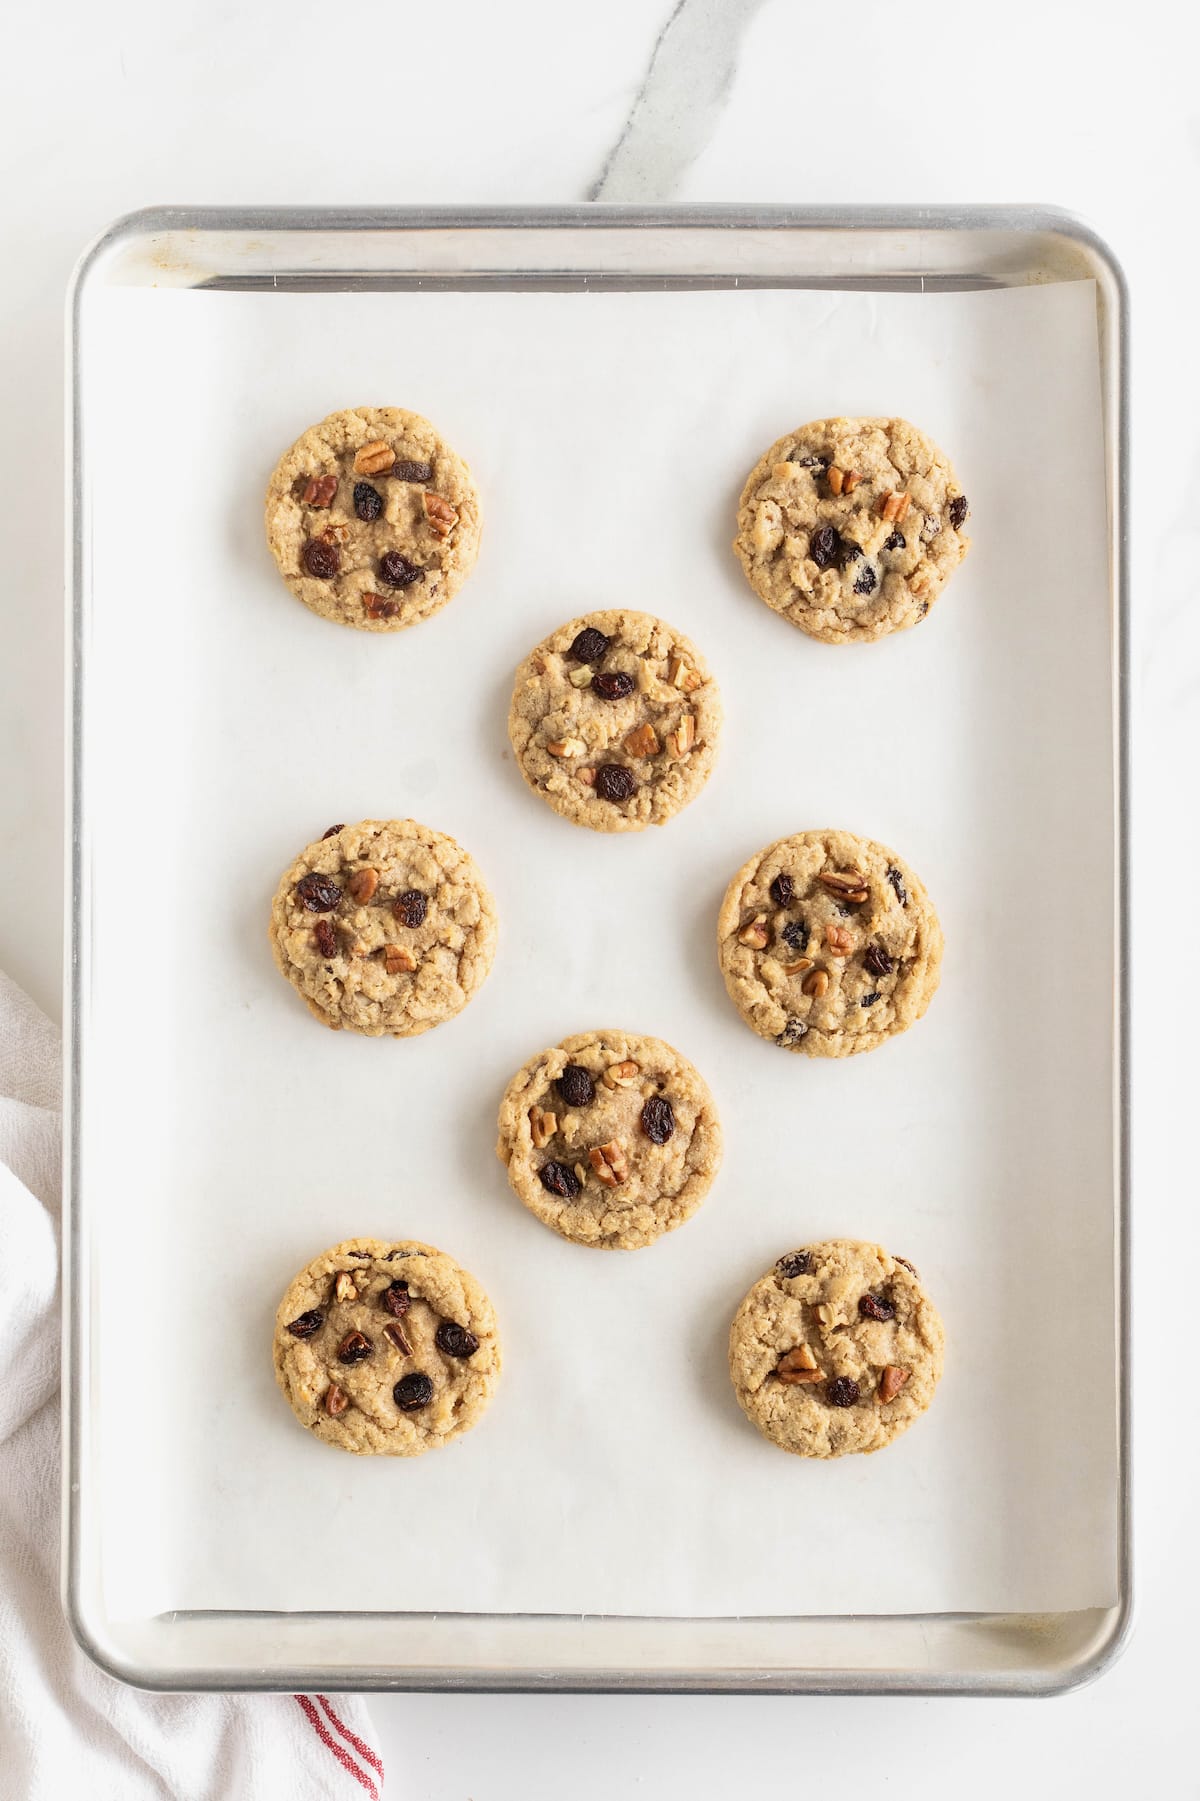 Eight baked oatmeal cookies on a parchment lined aluminum baking sheet.